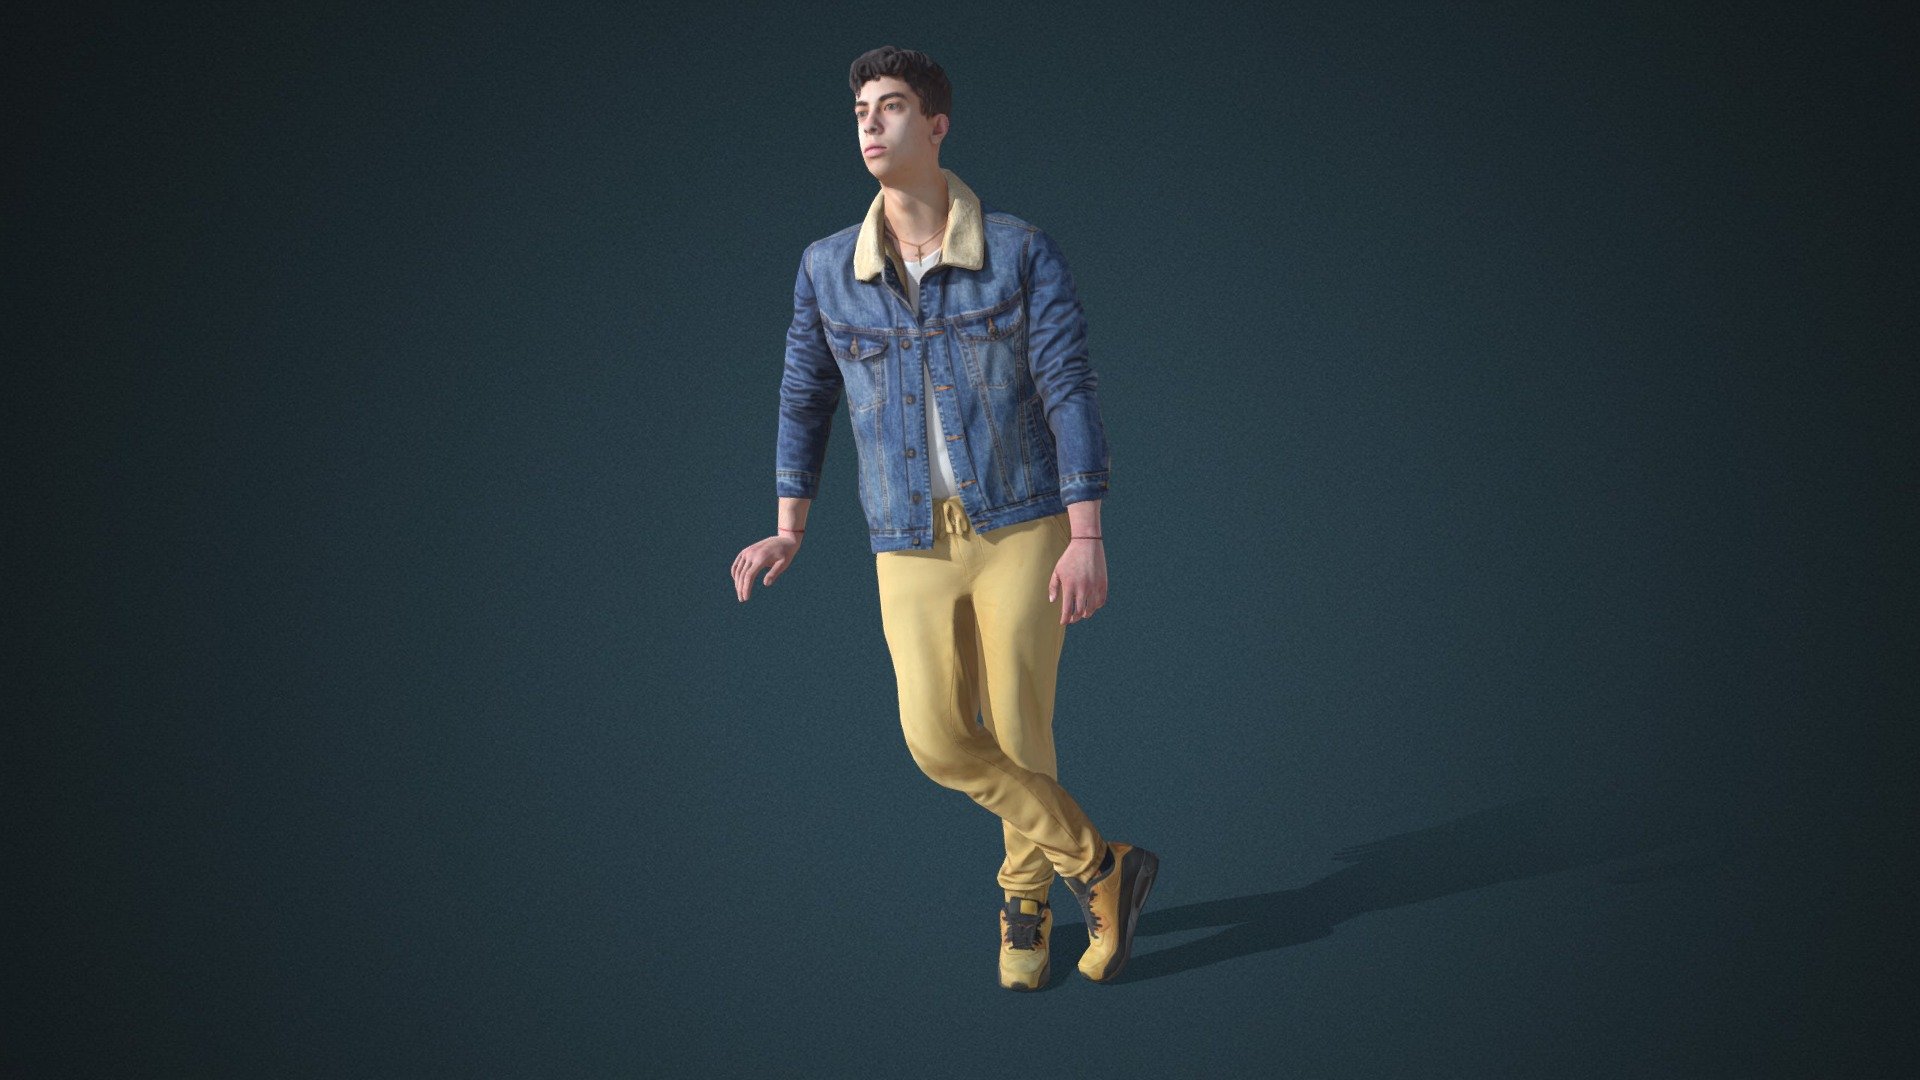 Do you like this model?  Free Download more models, motions and auto rigging tool AccuRIG (Value: $150+) on ActorCore
 

This model includes 2 mocap animations: Modern_M_Idle,Male_walk. Get more free motions

Design for high-performance crowd animation.

Buy full pack and Save 20%+: Young Fashion Vol.3


SPECIFICATIONS

✔ Geometry : 7K~10K Quads, one mesh

✔ Material : One material with changeable colors.

✔ Texture Resolution : 4K

✔ Shader : PBR, Diffuse, Normal, Roughness, Metallic, Opacity

✔ Rigged : Facial and Body (shoulders, fingers, toes, eyeballs, jaw)

✔ Blendshape : 122 for facial expressions and lipsync

✔ Compatible with iClone AccuLips, Facial ExPlus, and traditional lip-sync.


About Reallusion ActorCore

ActorCore offers the highest quality 3D asset libraries for mocap motions and animated 3D humans for crowd rendering 3d model